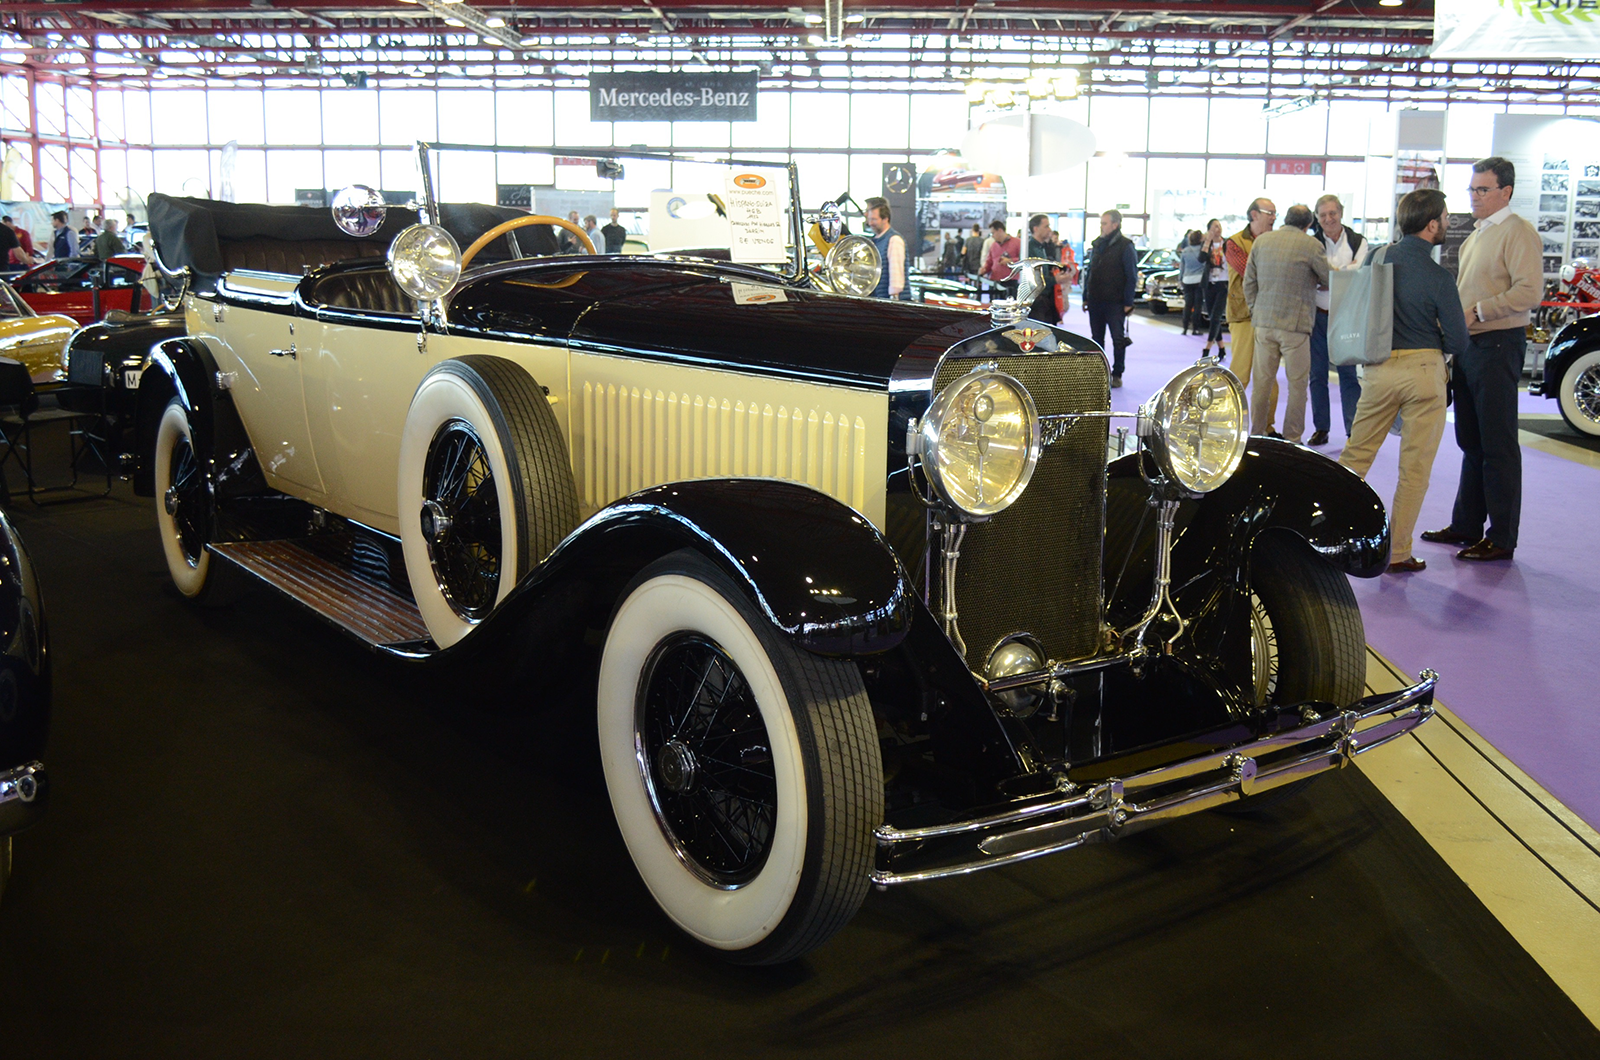 Classic & Sports Car – Seat, Citroën and Bentley shine at ClassicAuto Madrid